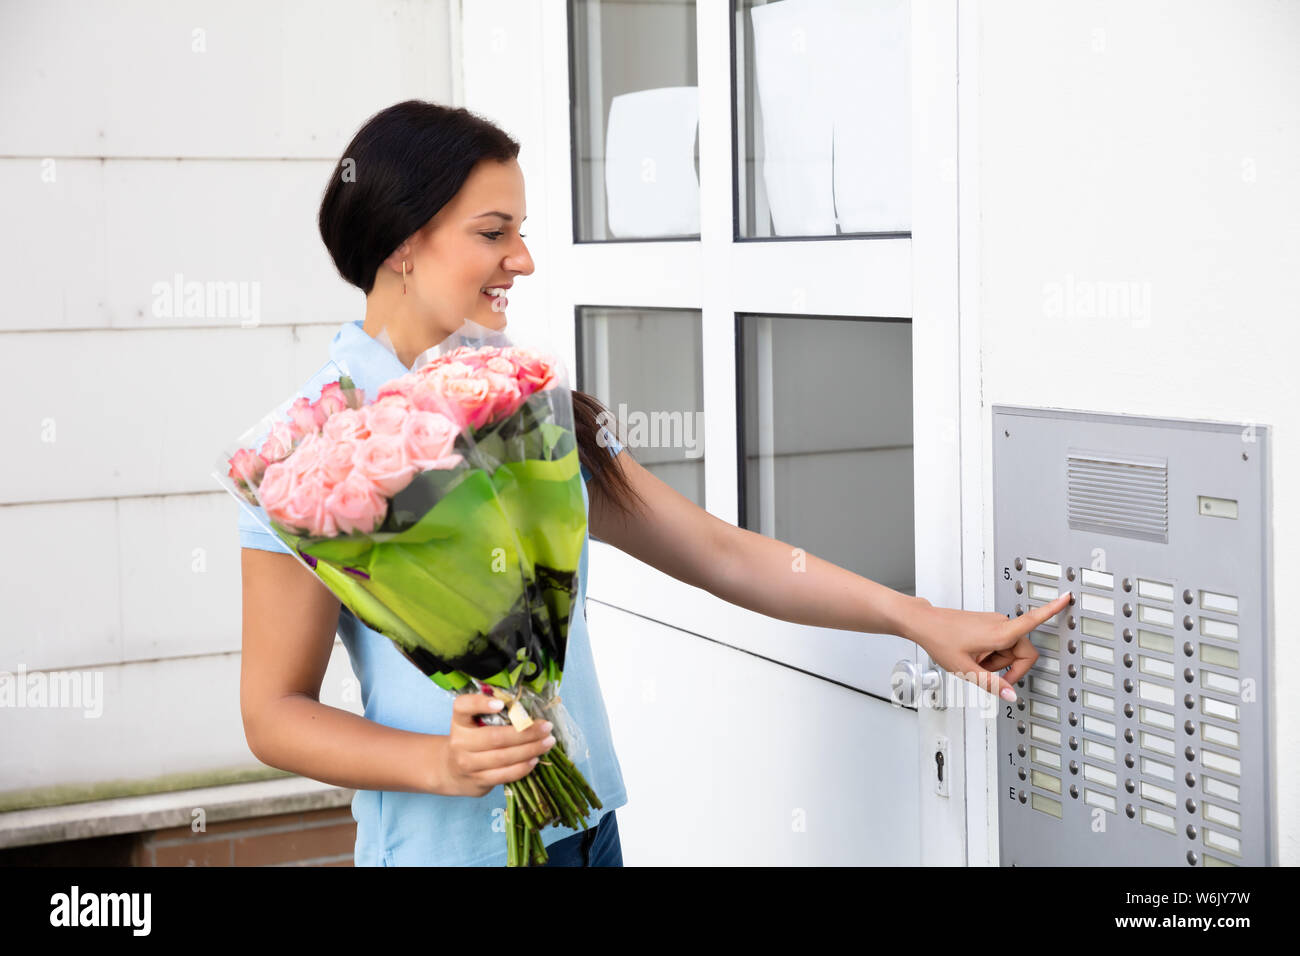 Happy Young Woman Holding Bouquet Pressing Button Of Intercom To Enter Home Stock Photo